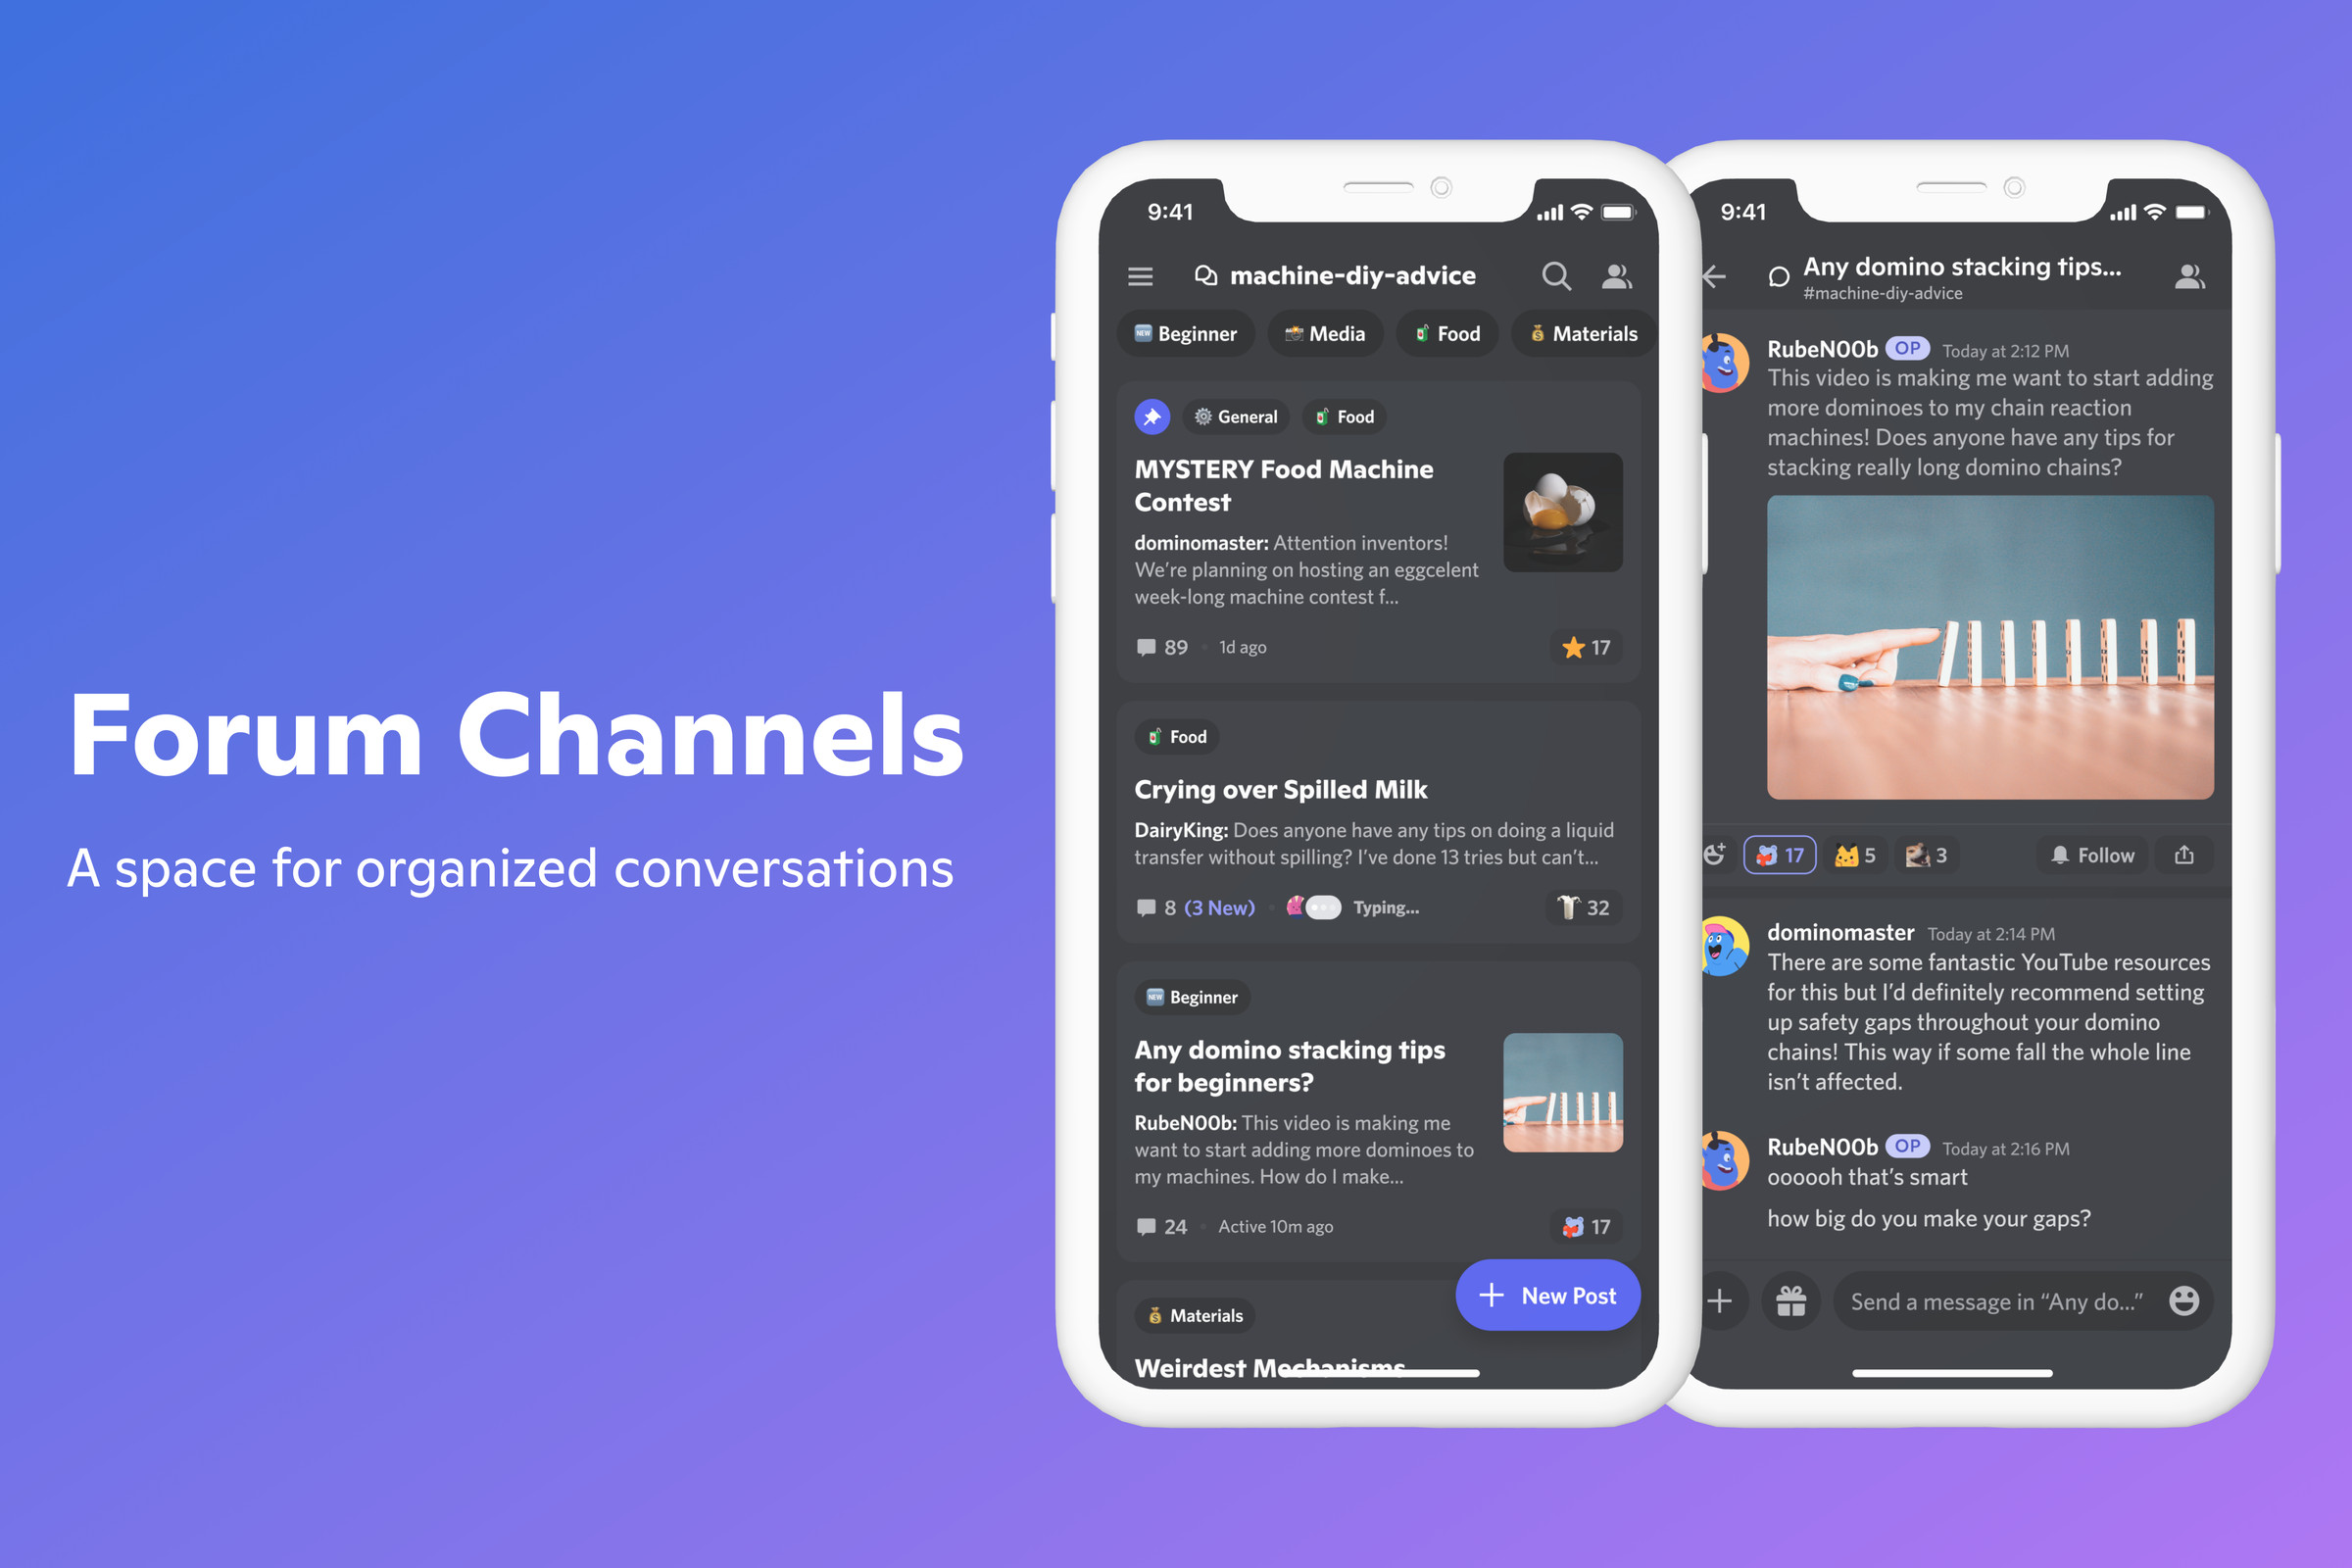 Discord’s Forum Channels on a mobile device, showing how conversations are organized using this new feature